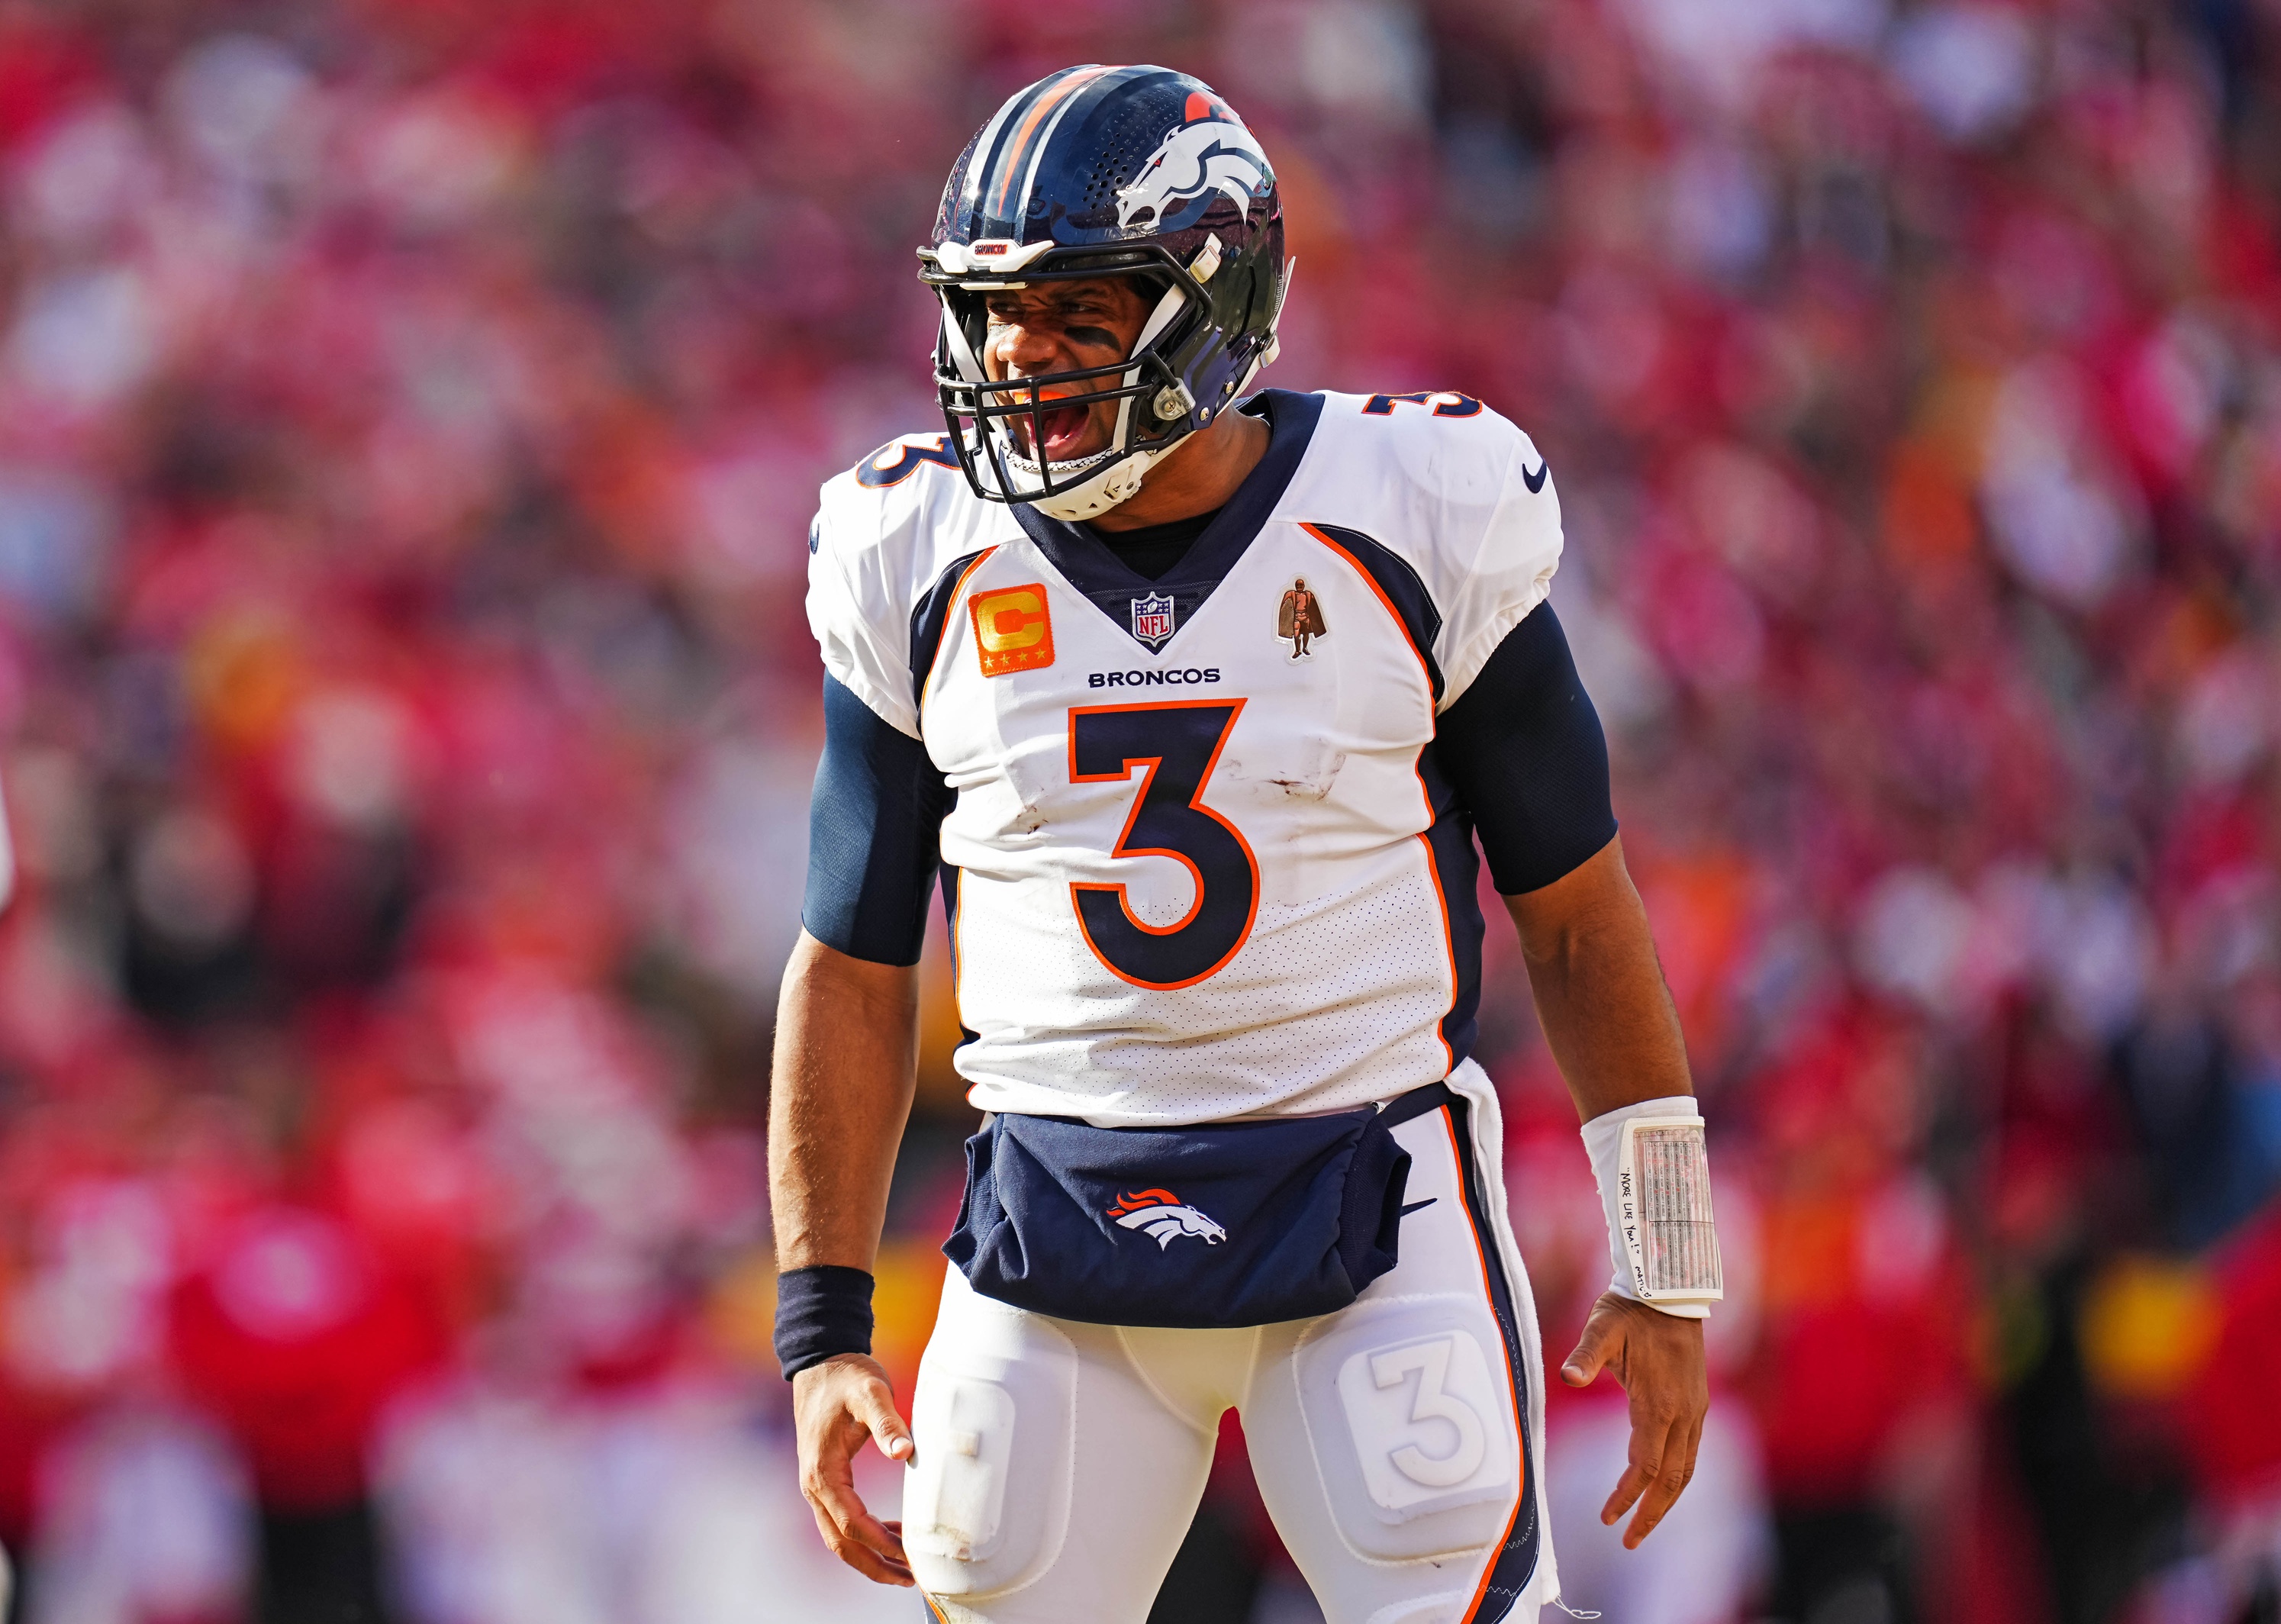 NFL Exec: Broncos Unattractive Because Russell Wilson is 'Washed'